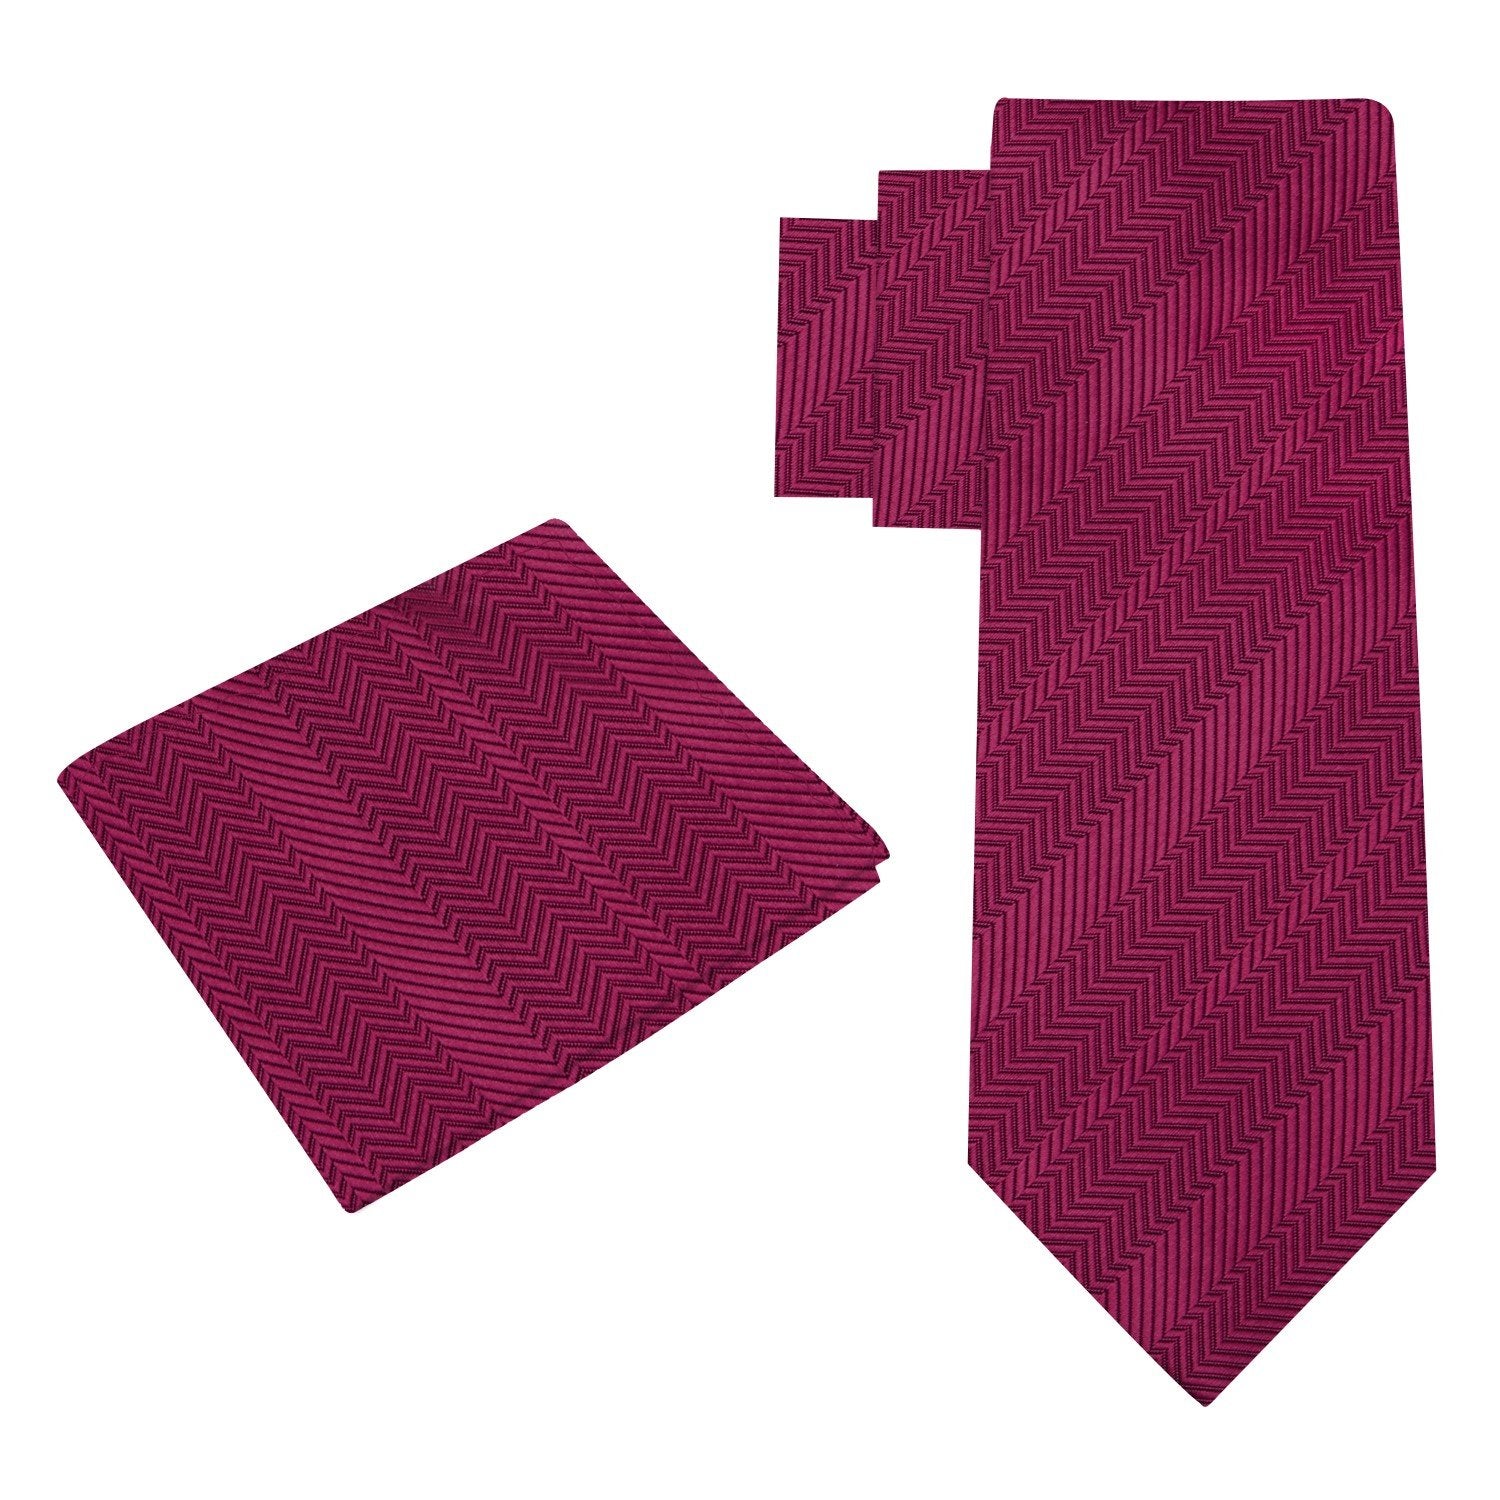 Alt View: Sophisticated Rosewood Tie and Square